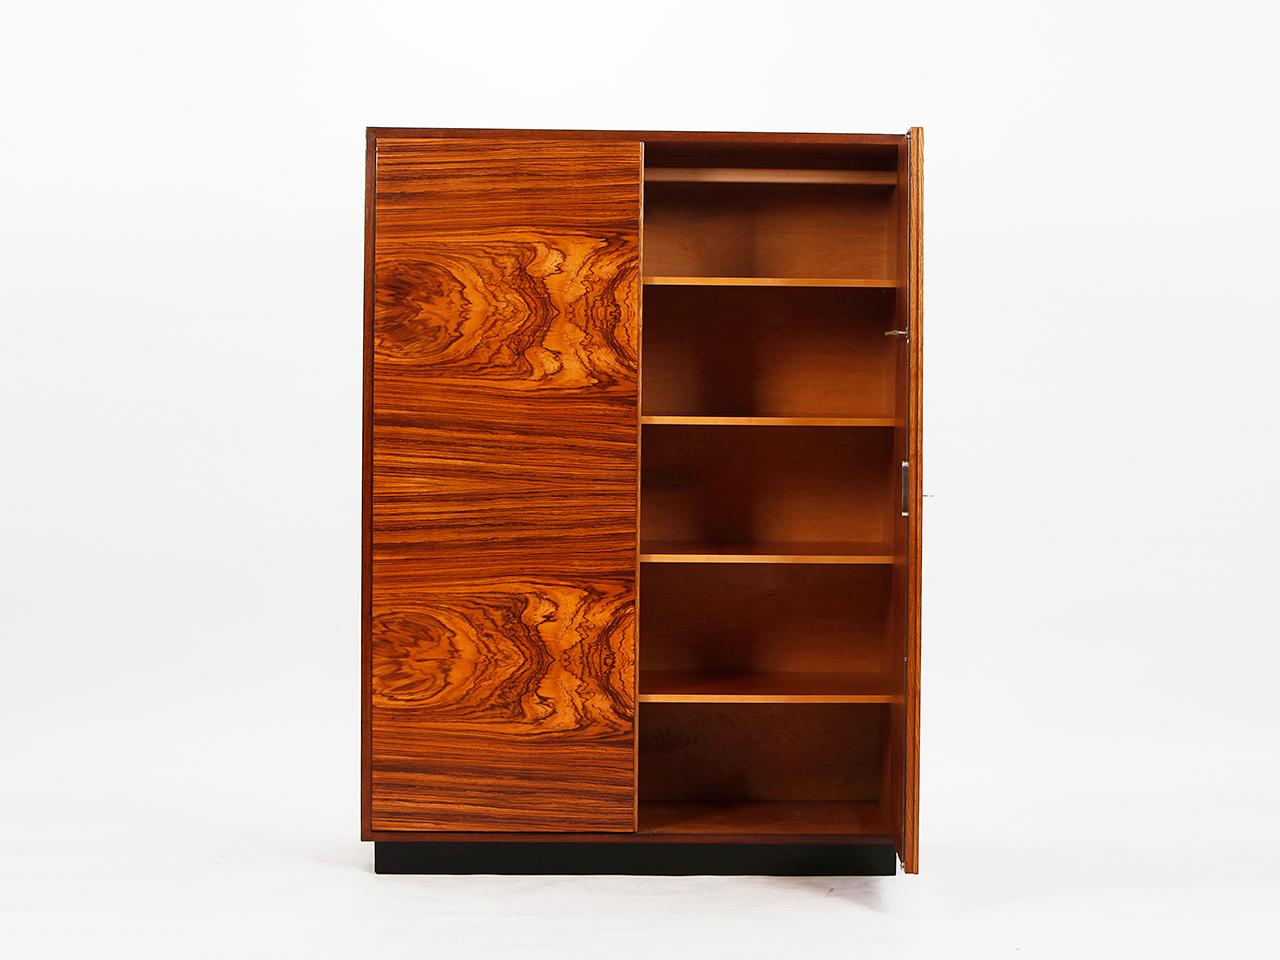 Designed by Jindrich Halabala in the 1930s. Produced by spojene UP Závody in former Czechoslovakia. Features two doors veneered in Caucasian walnut. Oak body. Removable shelves. Restored original condition.